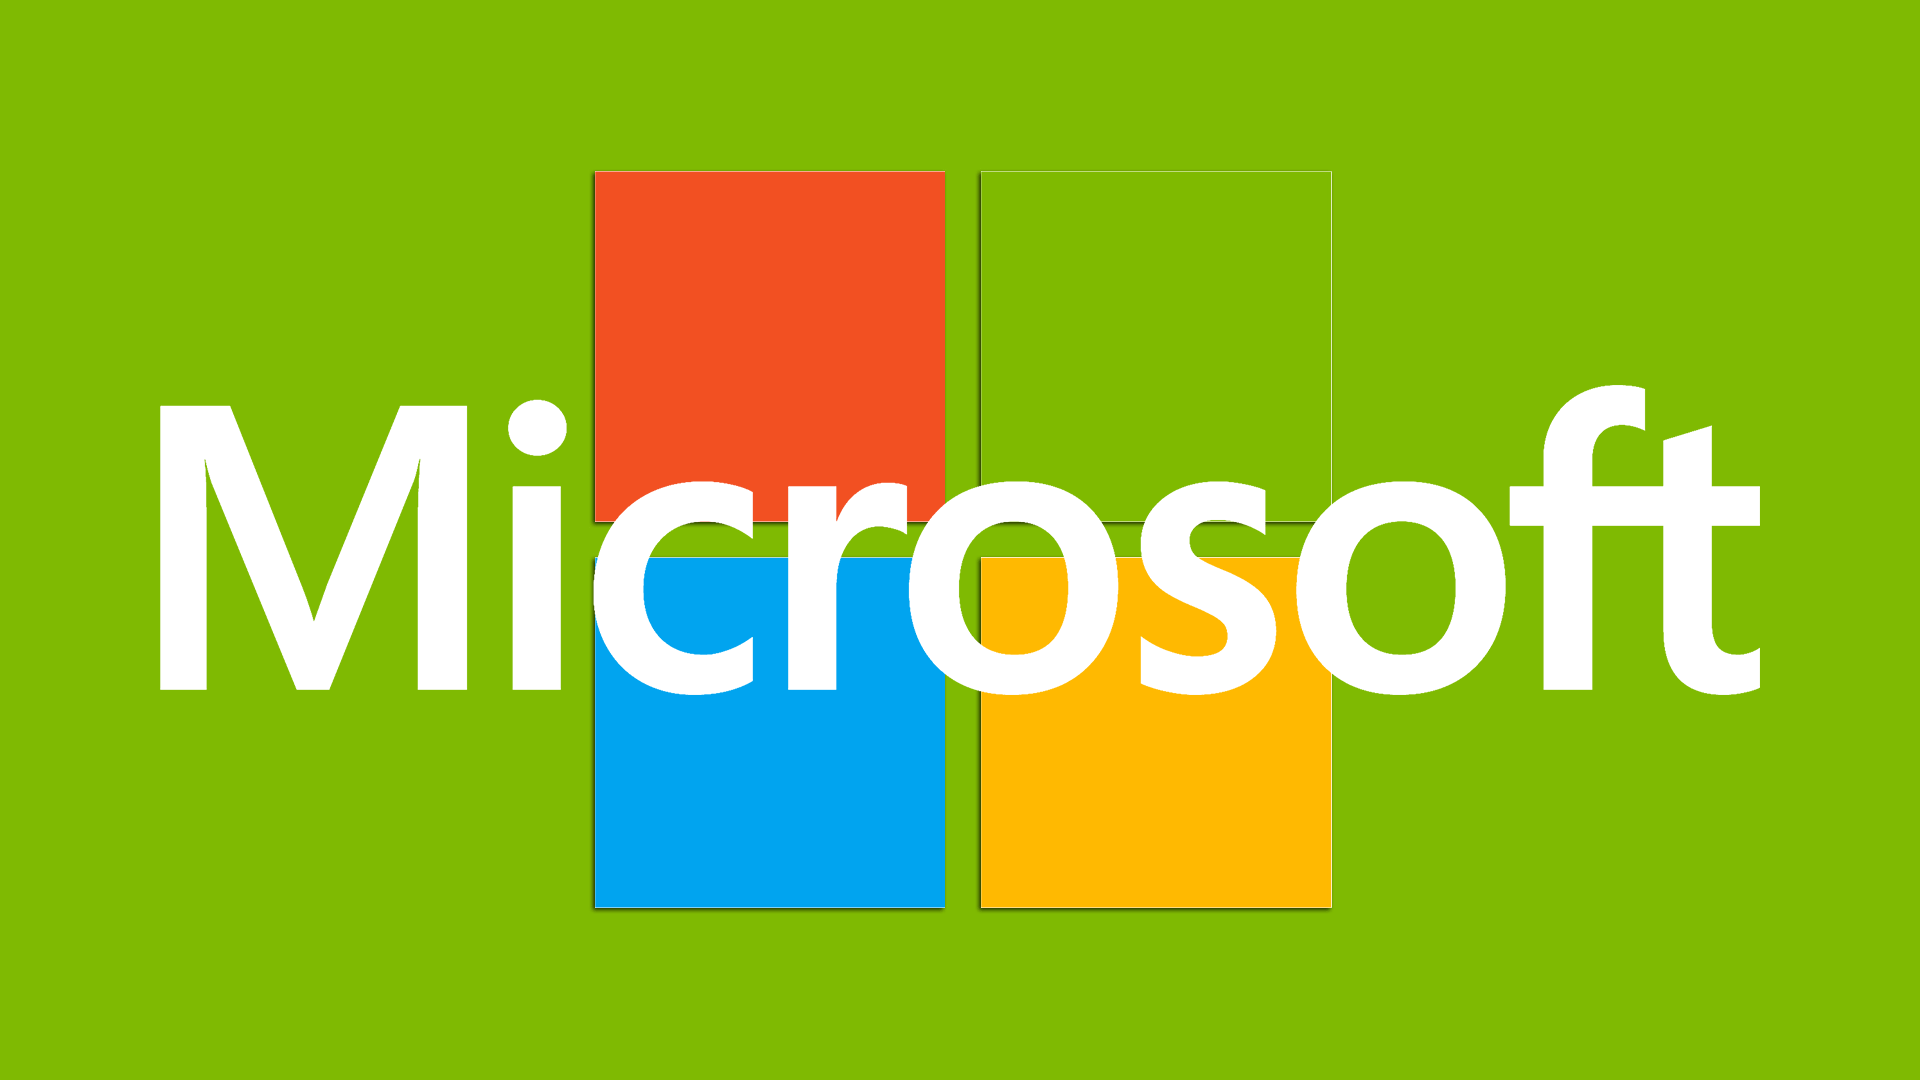 Microsoft Green Logo - Microsoft Wins 13 Bing-Related Domains From Squatter - Marketing Land